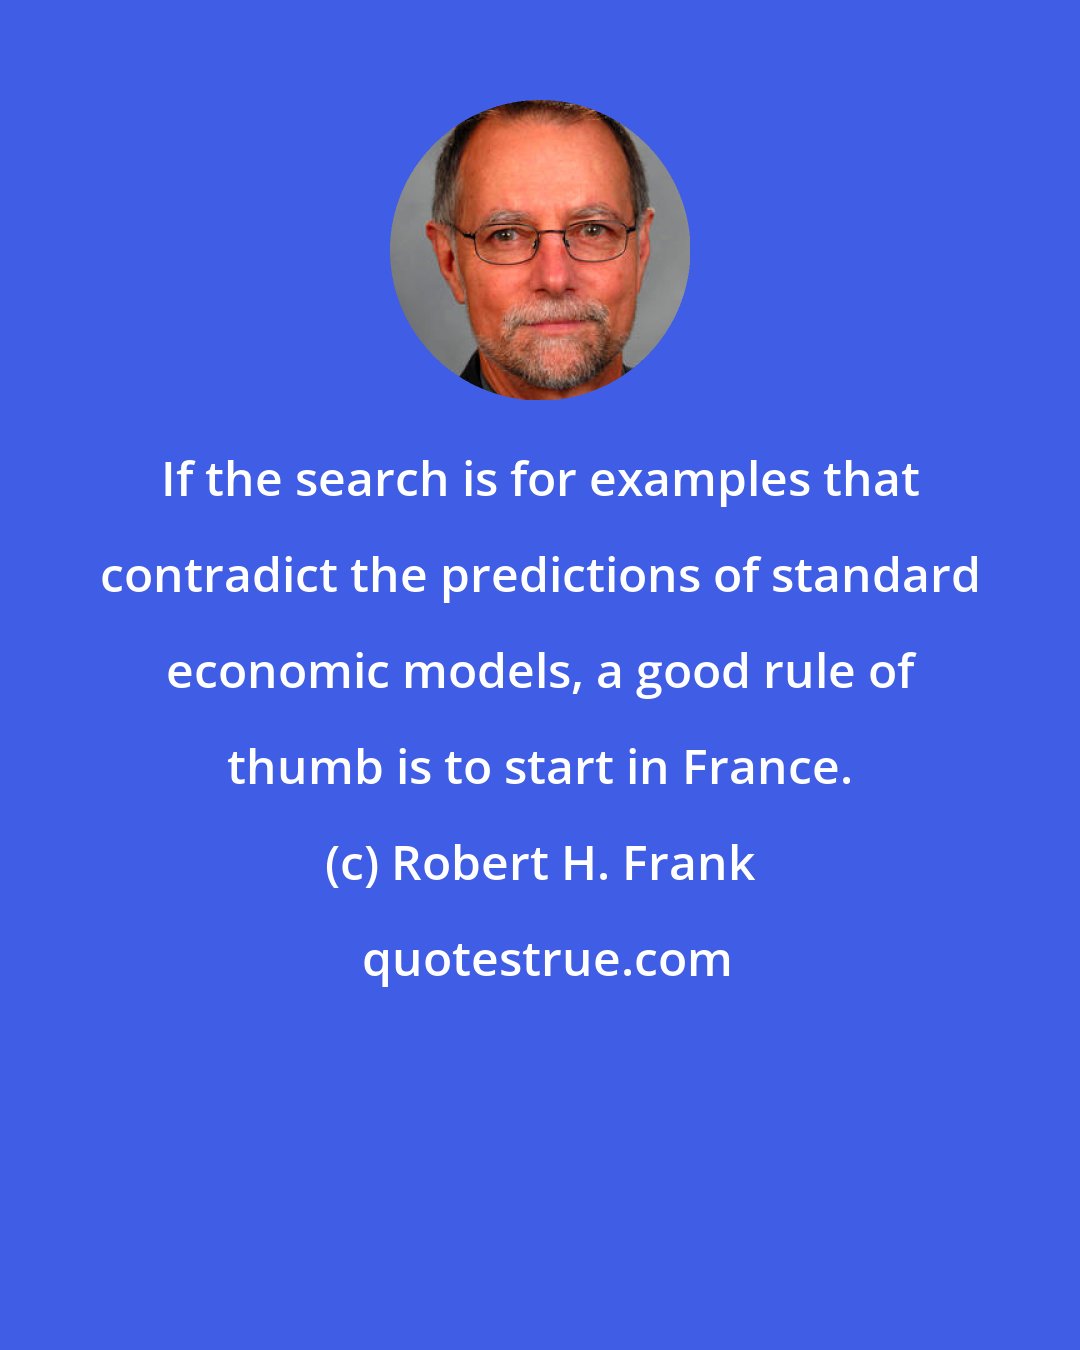 Robert H. Frank: If the search is for examples that contradict the predictions of standard economic models, a good rule of thumb is to start in France.